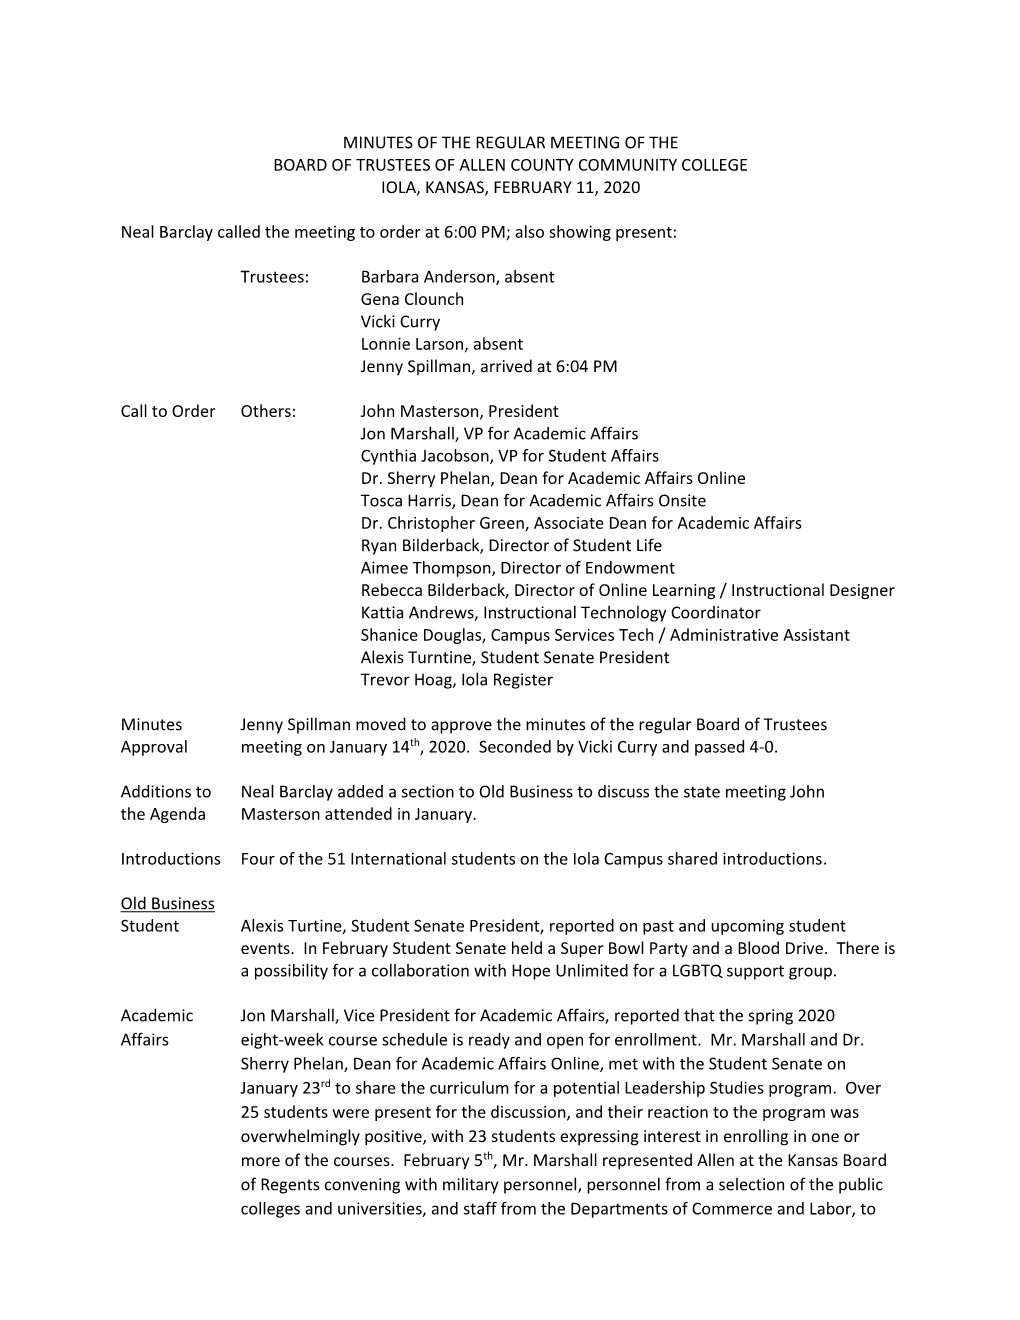 Minutes of the Regular Meeting of the Board of Trustees of Allen County Community College Iola, Kansas, February 11, 2020